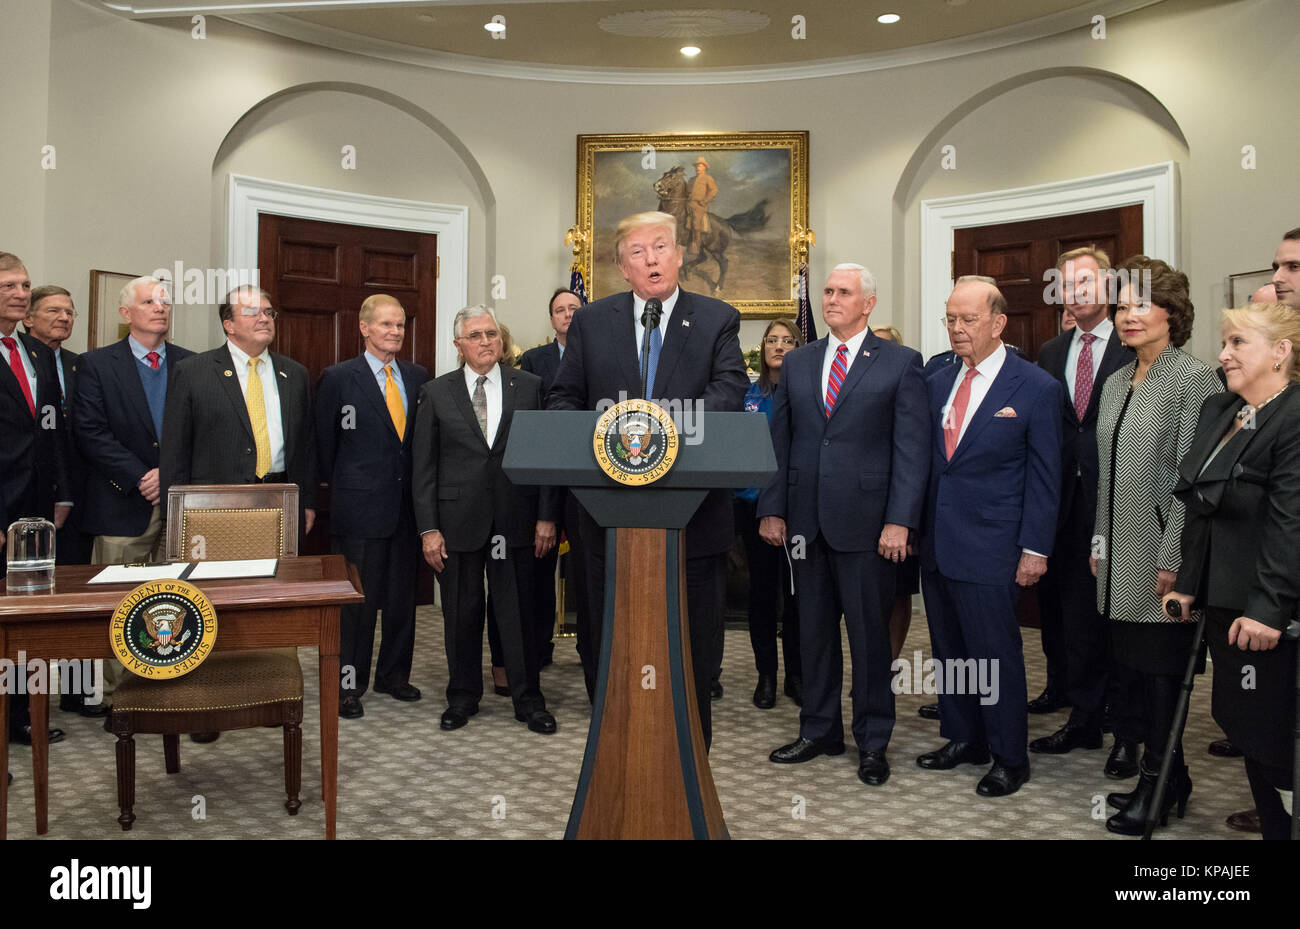 United States President Donald J. Trump speaks before signing the Presidential Space Directive - 1, directing NASA to return to the moon, alongside US Vice President Mike Pence, members of the Senate, Congress, NASA, and commercial space companies in the Roosevelt Room of the White House in Washington, Monday, December 11, 2017. Mandatory Credit: Aubrey Gemignani / NASA via CNP       - NO WIRE SERVICE - Photo: Aubrey Gemignani/Consolidated/dpa Stock Photo